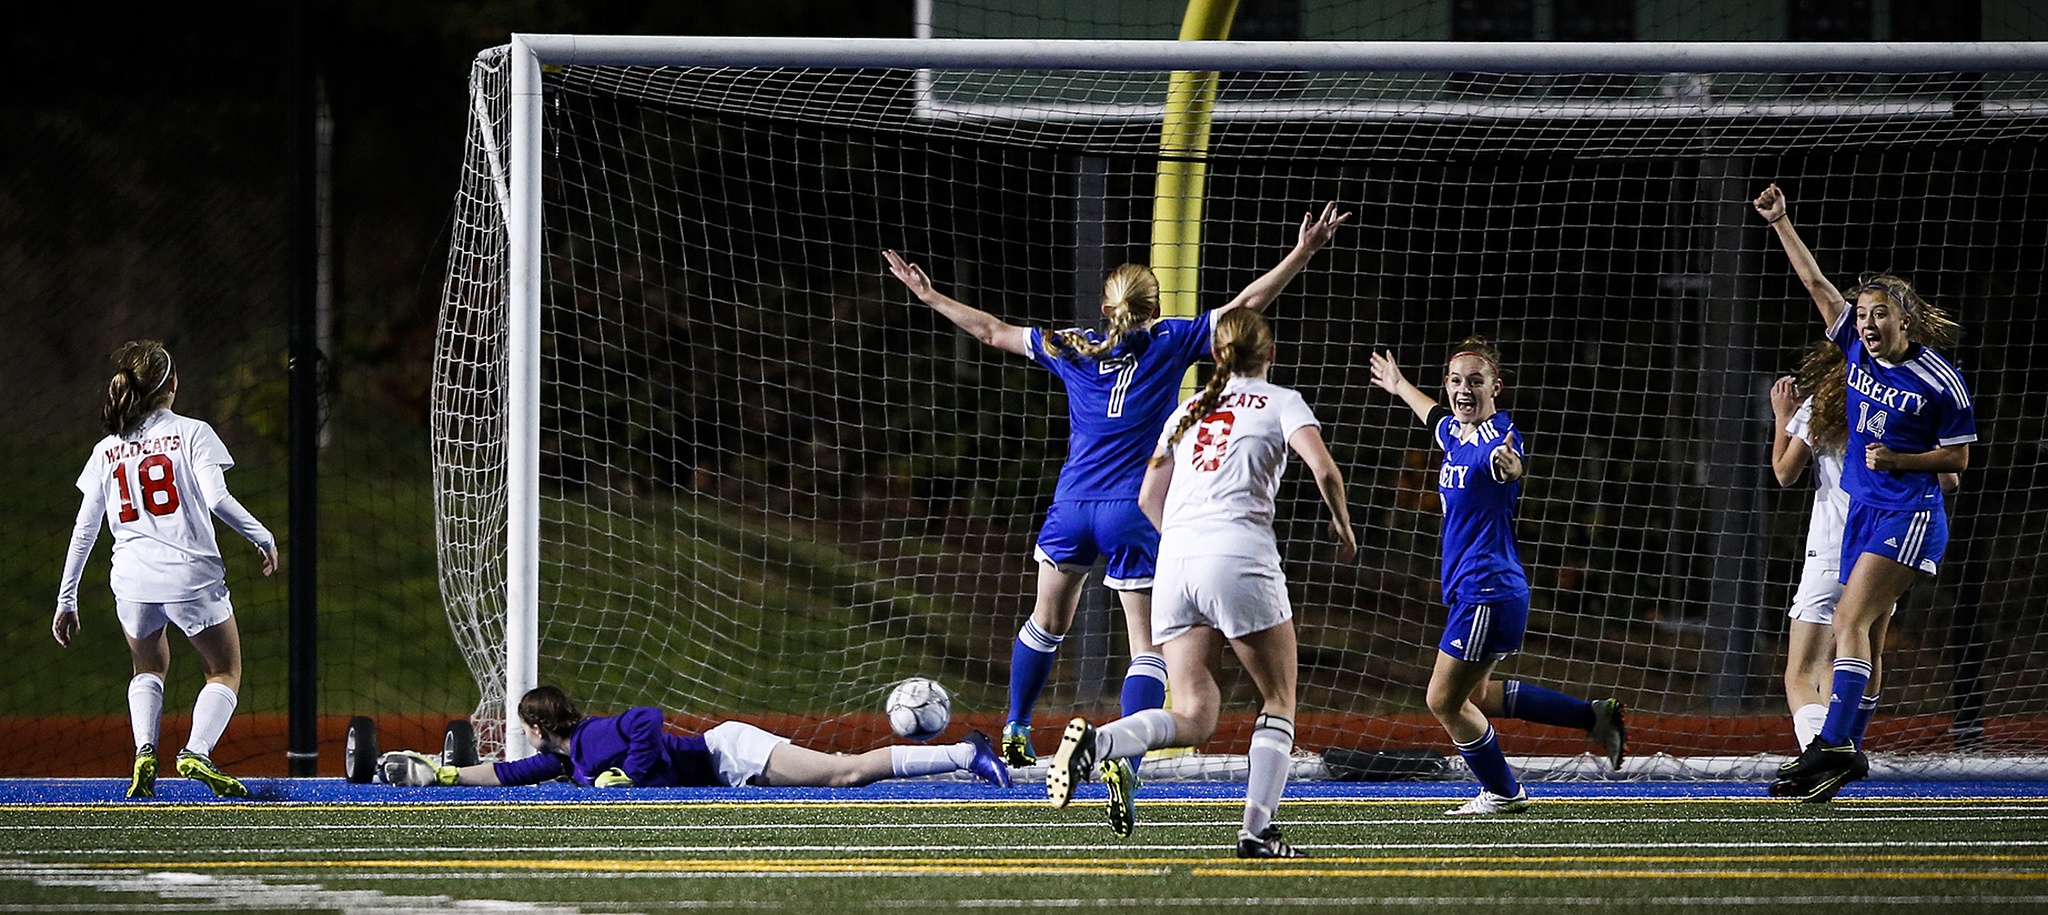 Archbishop Murphy goalkeeper Lily Zwiefel (left) lays on the turf as Liberty players celebrate a goal late in the first half of a 2A state semifinal at Shoreline Stadium on Friday. Liberty beat Archbishop Murphy 6-2. (Ian Terry / The Herald)